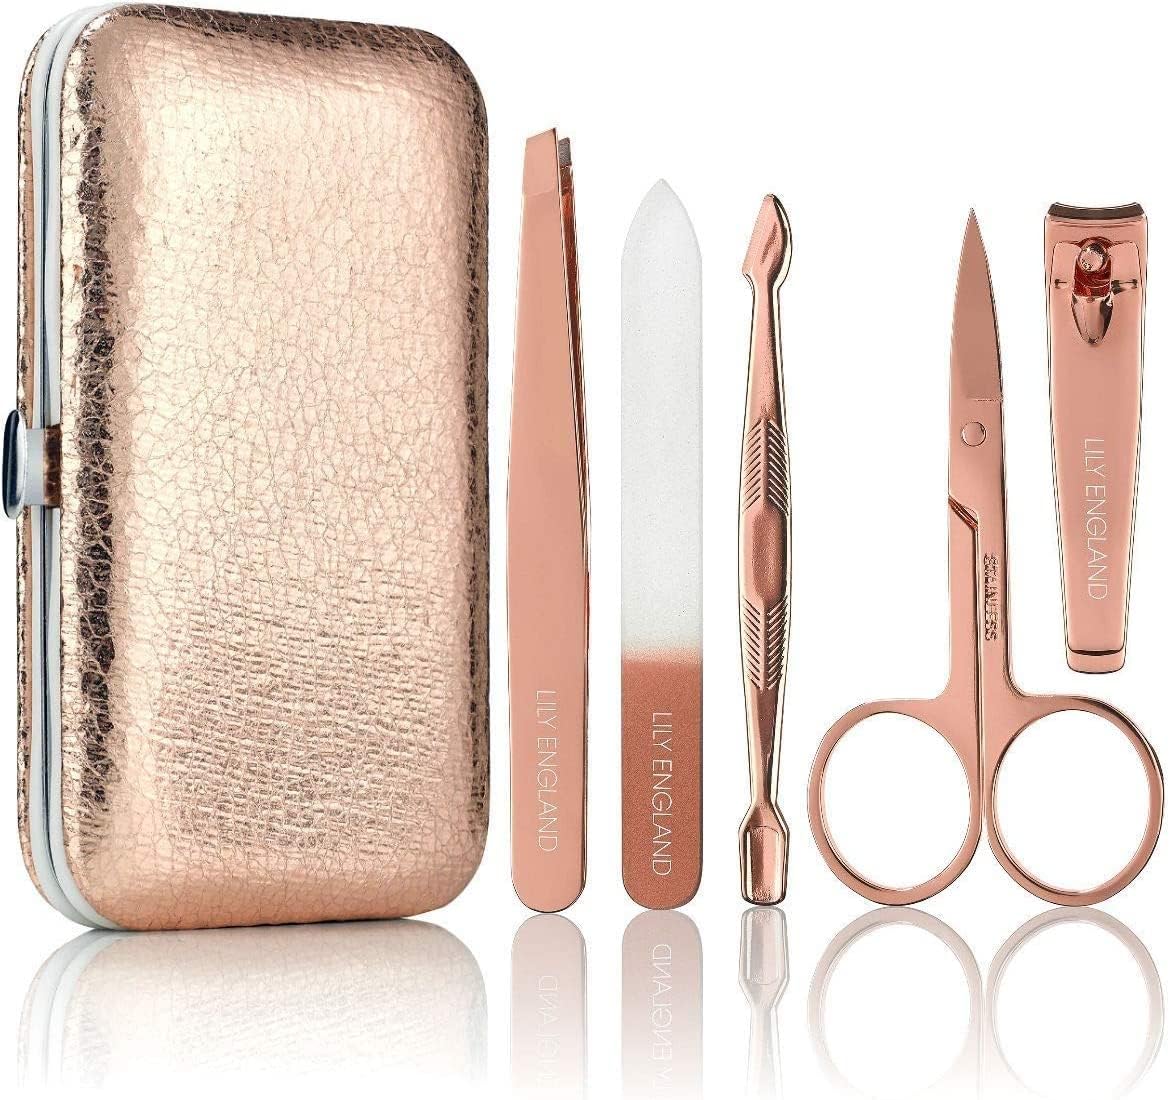 Manicure Set for Women & Girls - Professional Nail Tools & Pedicure Kit with Luxury Travel Case - Rose Gold by Lily England